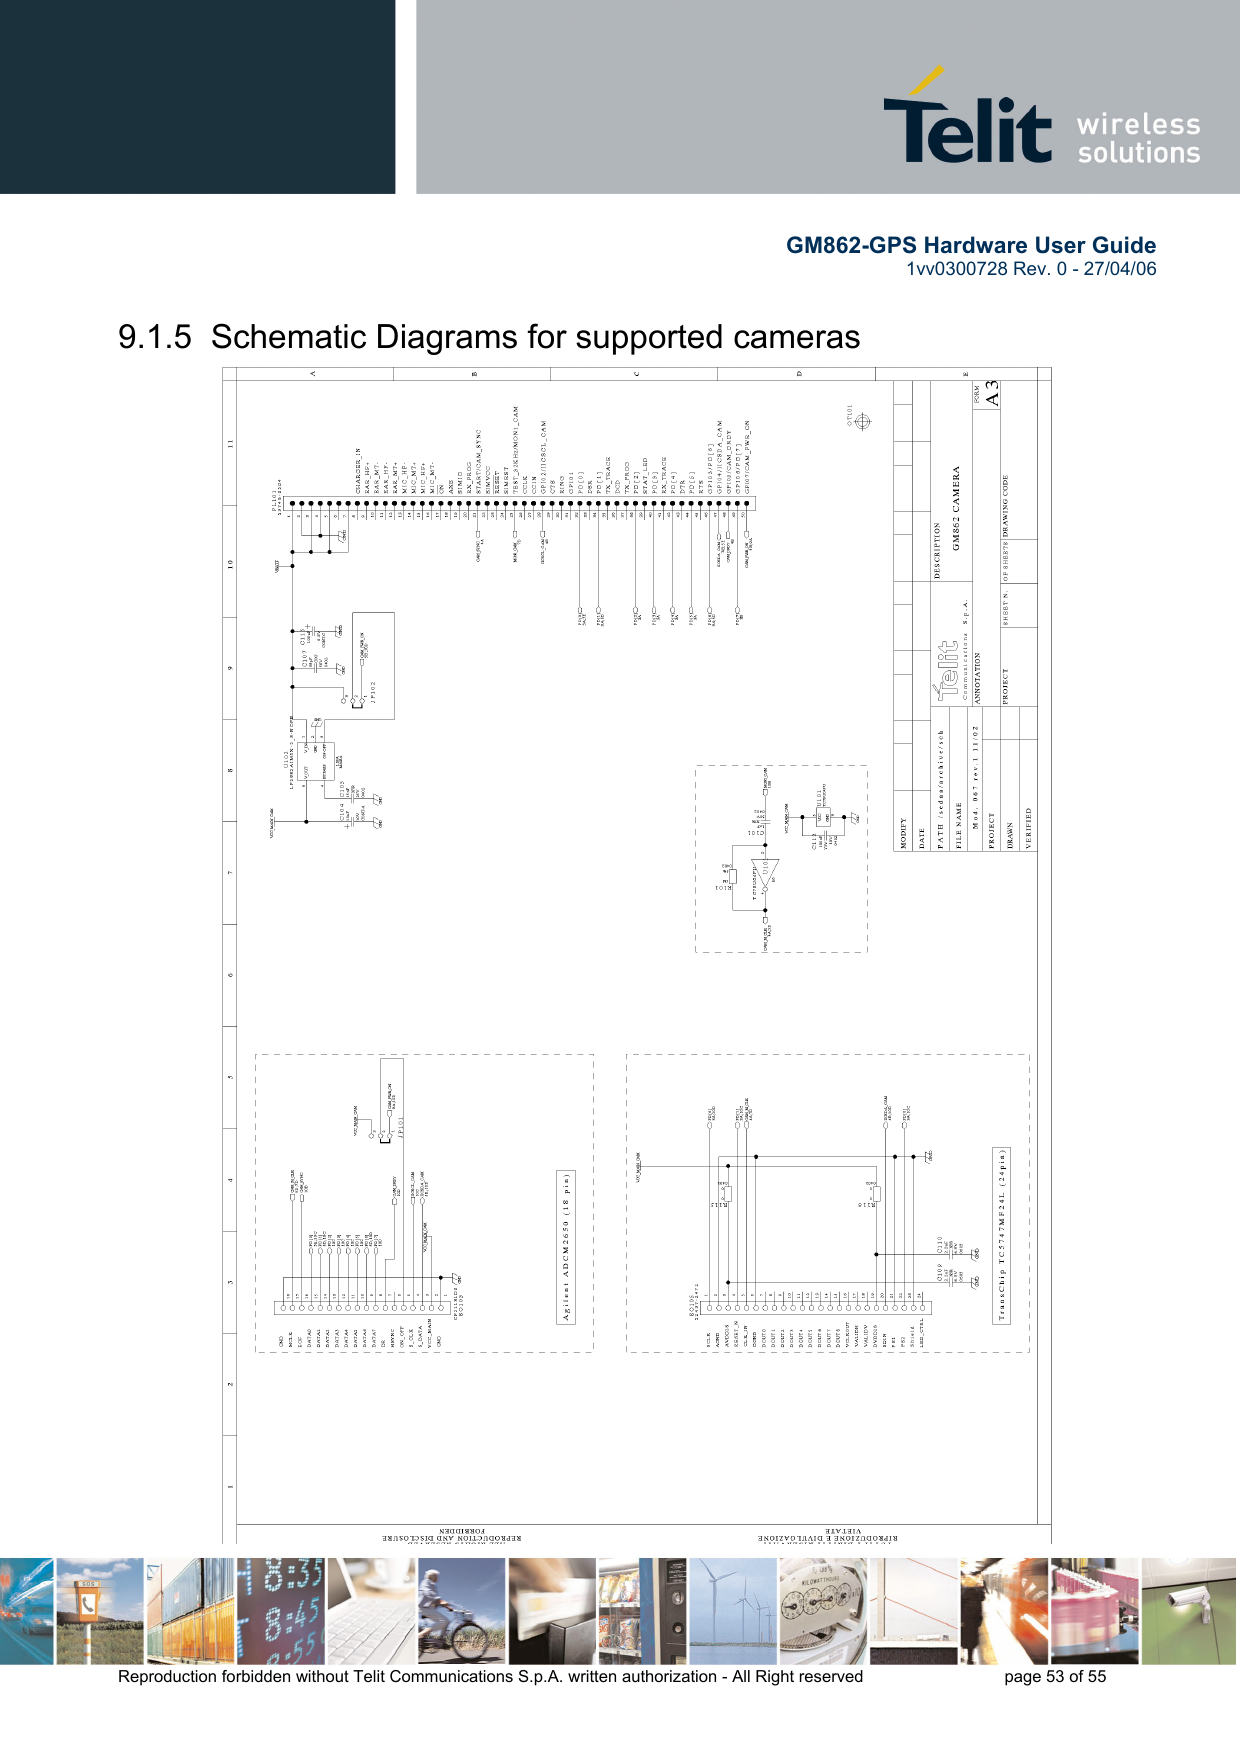        GM862-GPS Hardware User Guide   1vv0300728 Rev. 0 - 27/04/06    Reproduction forbidden without Telit Communications S.p.A. written authorization - All Right reserved    page 53 of 55  9.1.5  Schematic Diagrams for supported cameras 